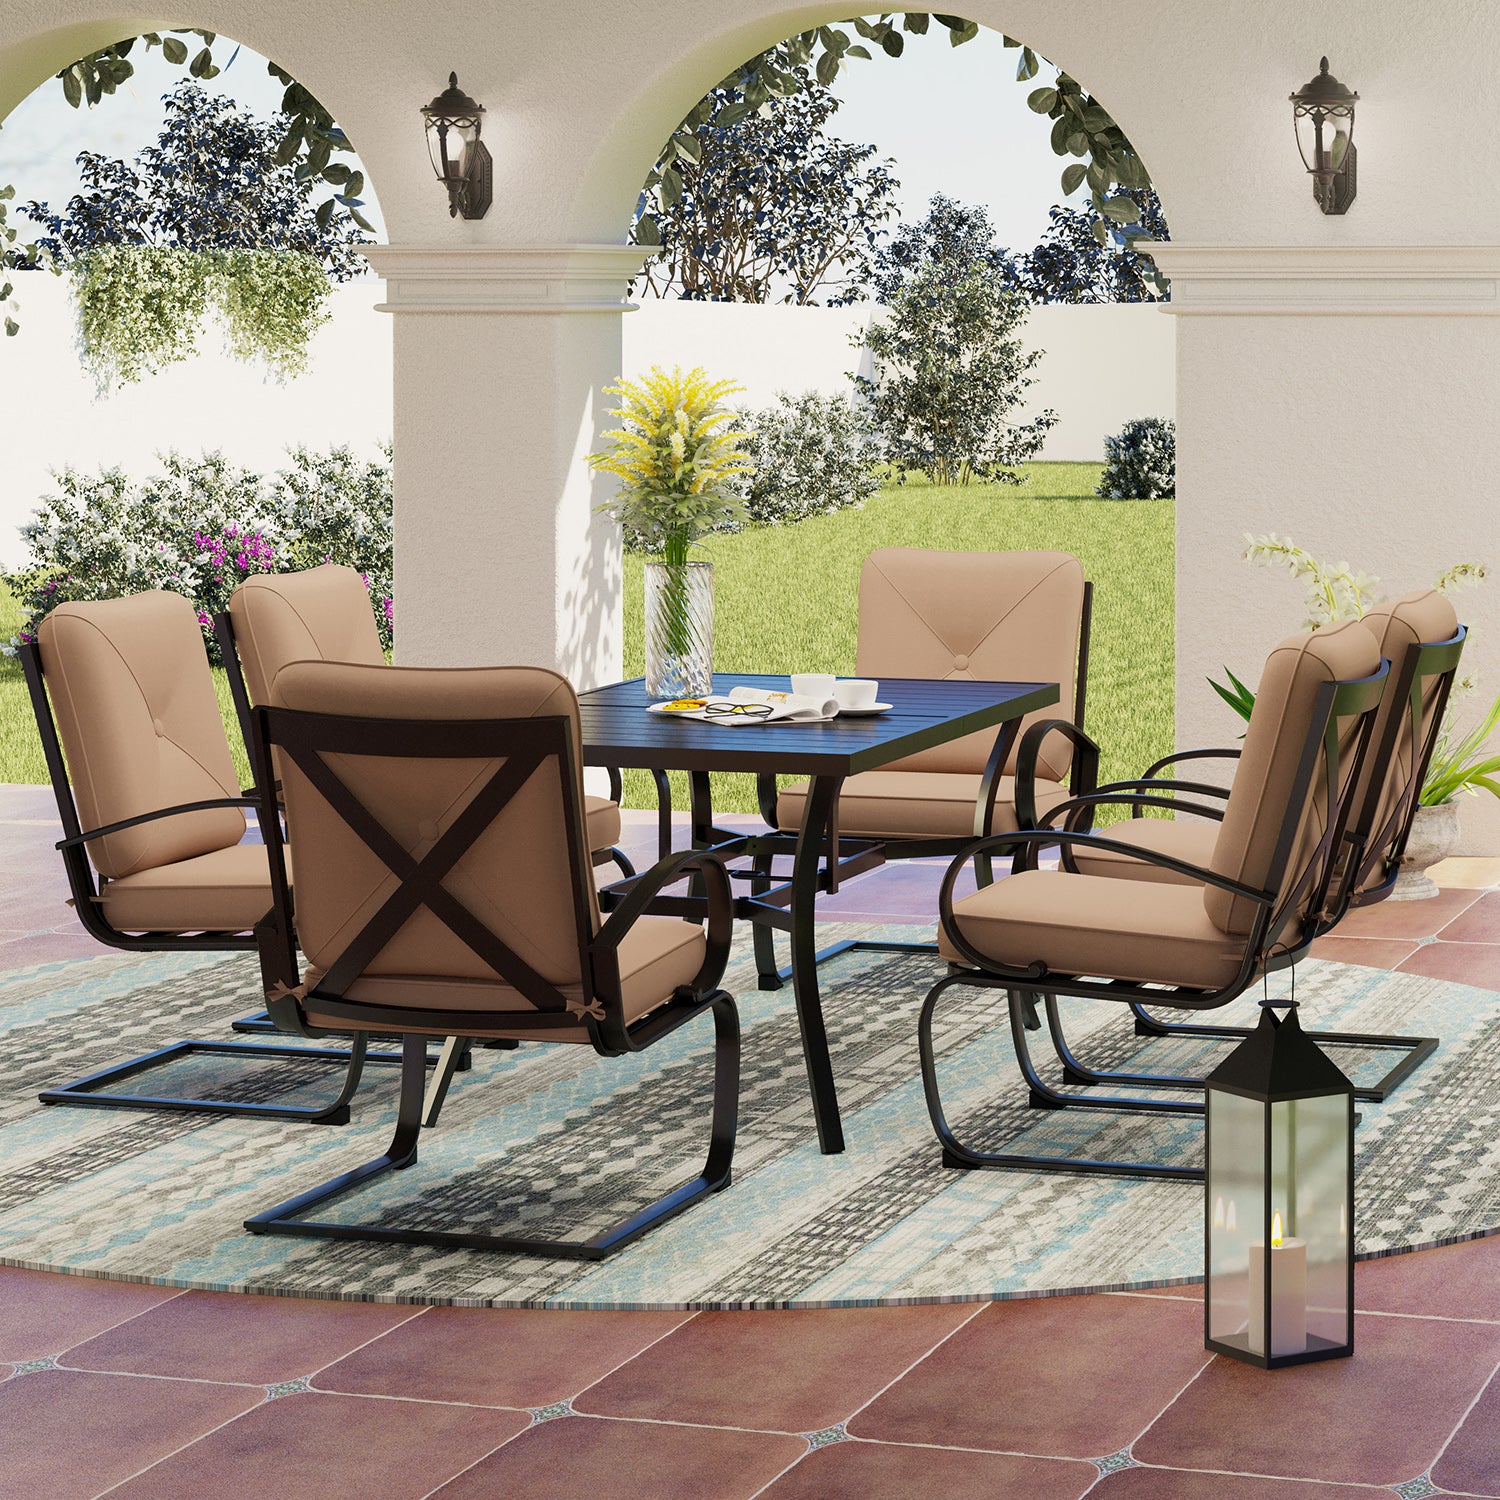 Sophia & William 7-Piece C-Spring Chairs & Steel Panel Table Patio Dining Set